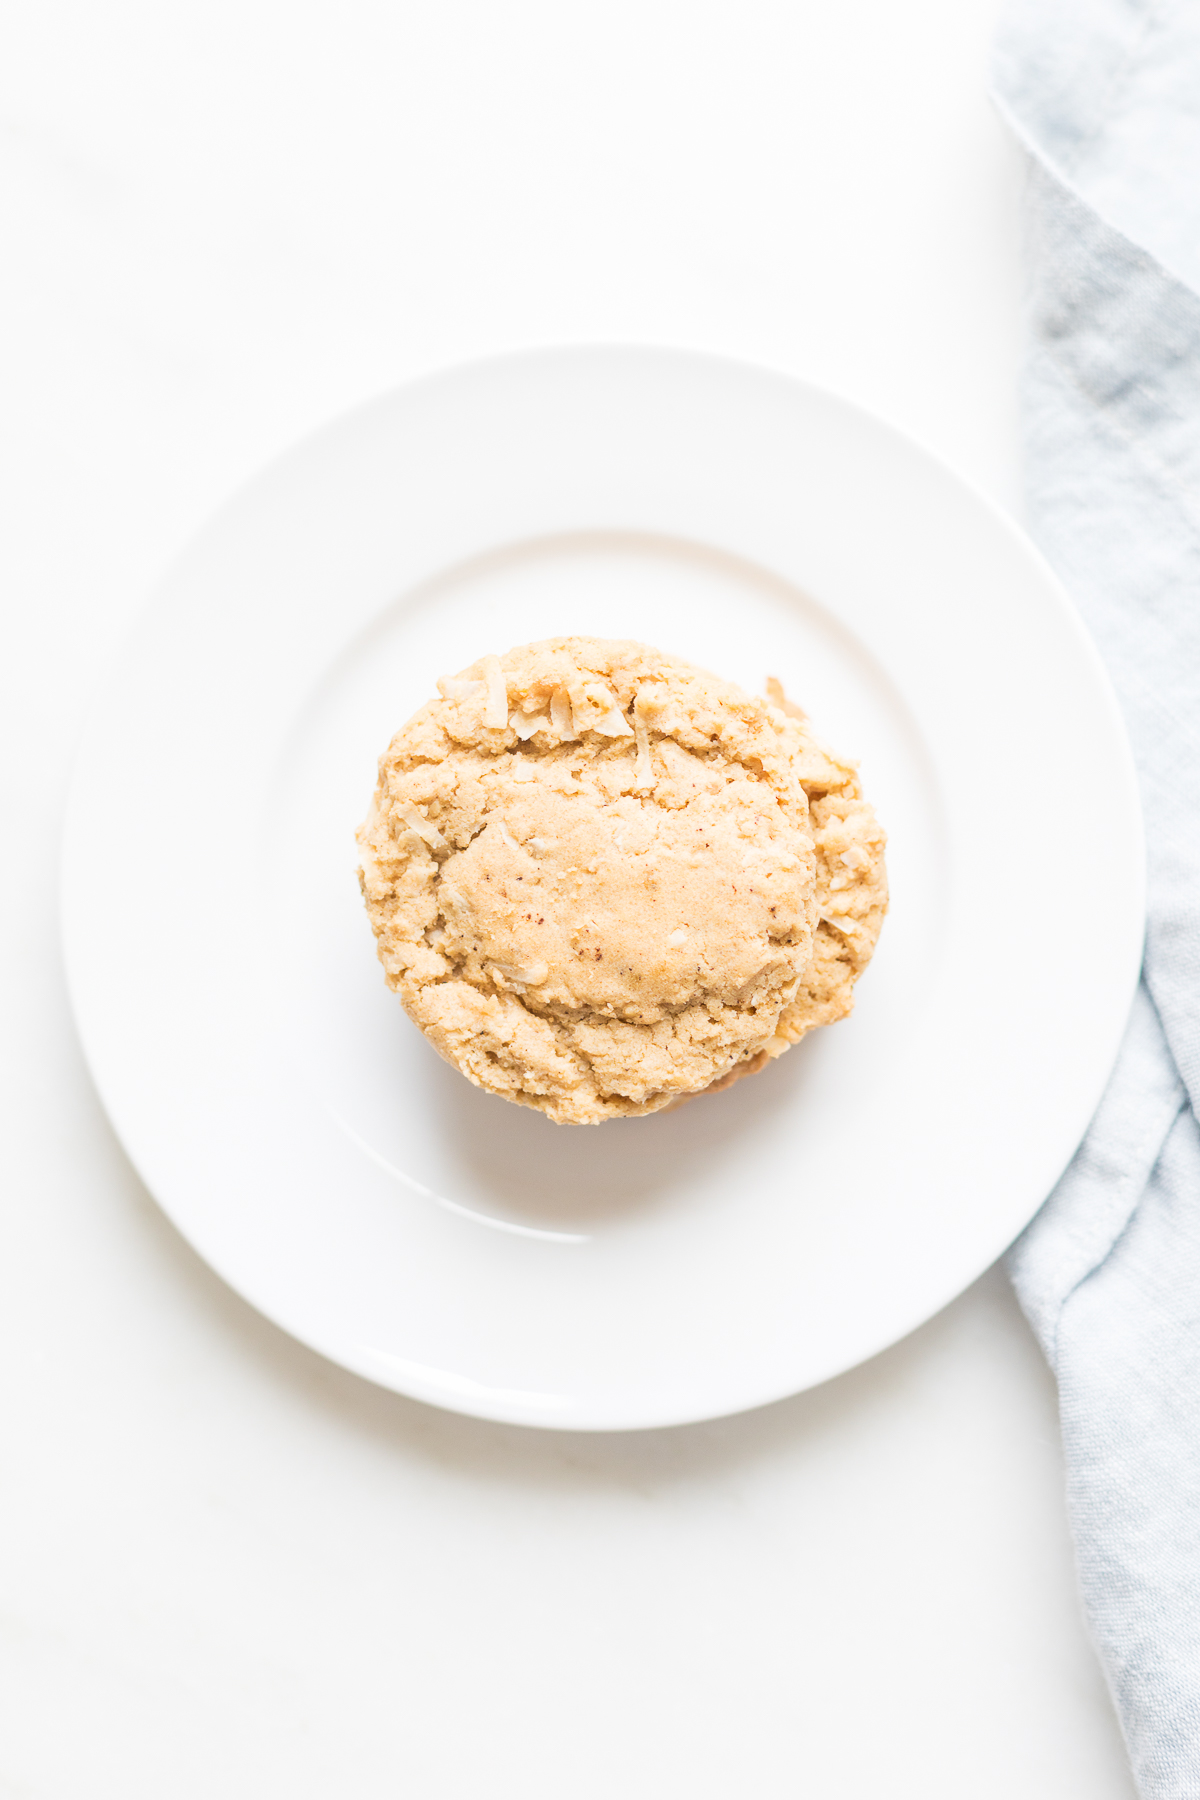 An oatmeal coconut cookie on a white plate.